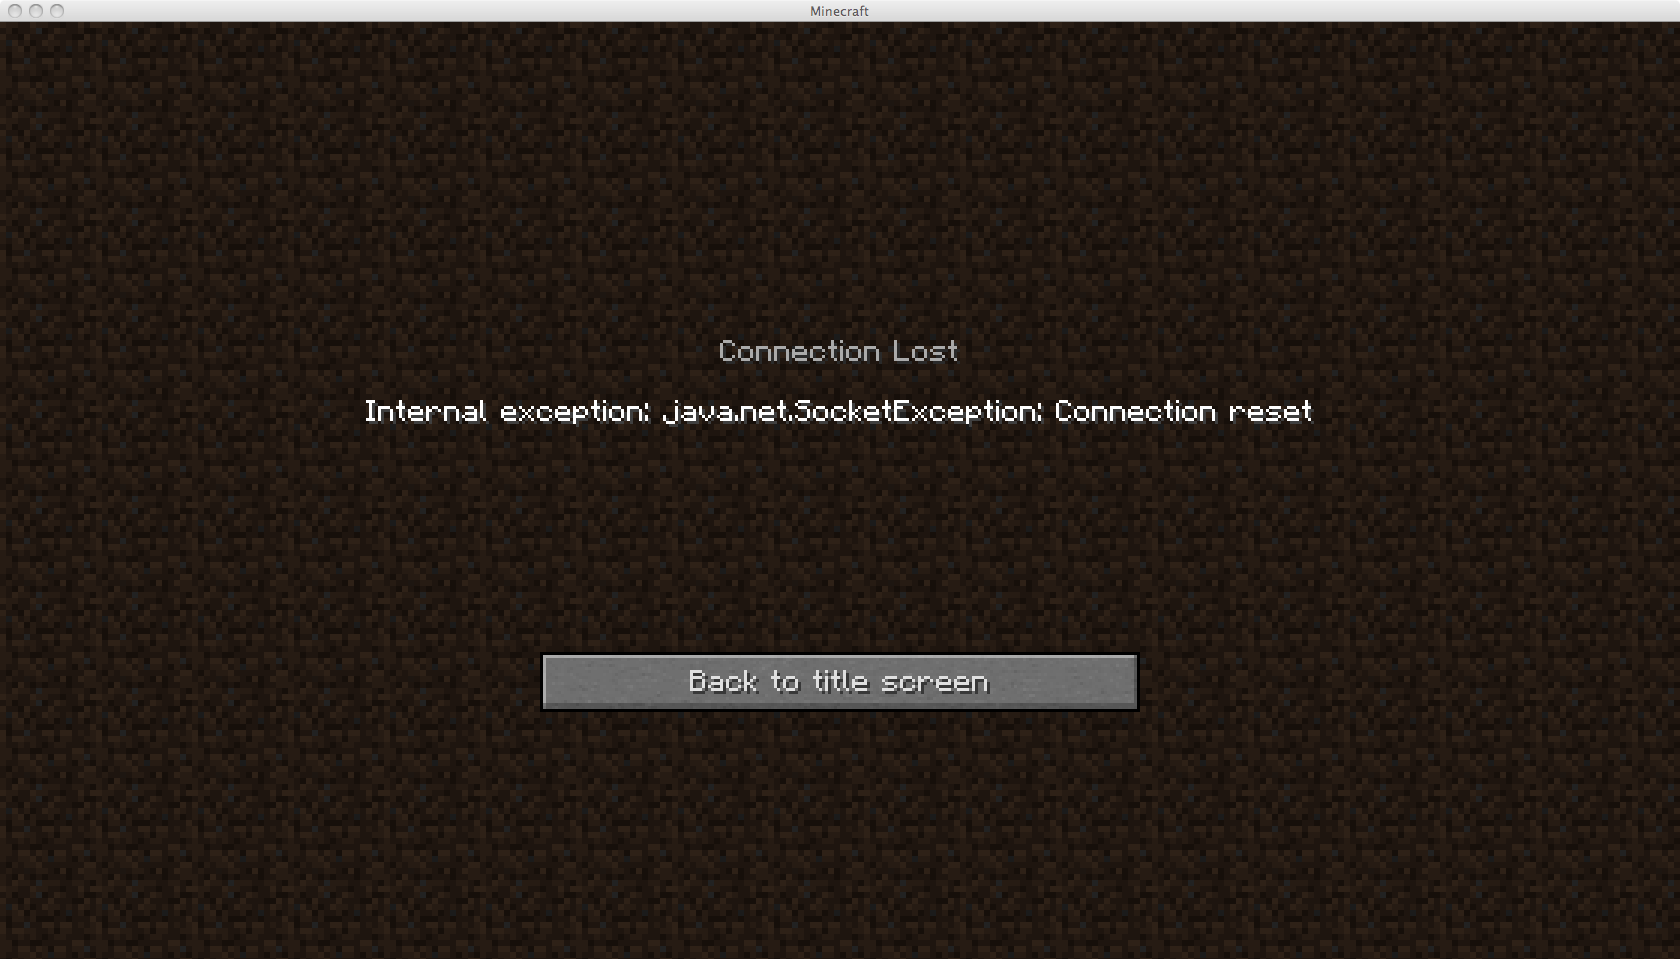 minecraft launcher cannot connect to server